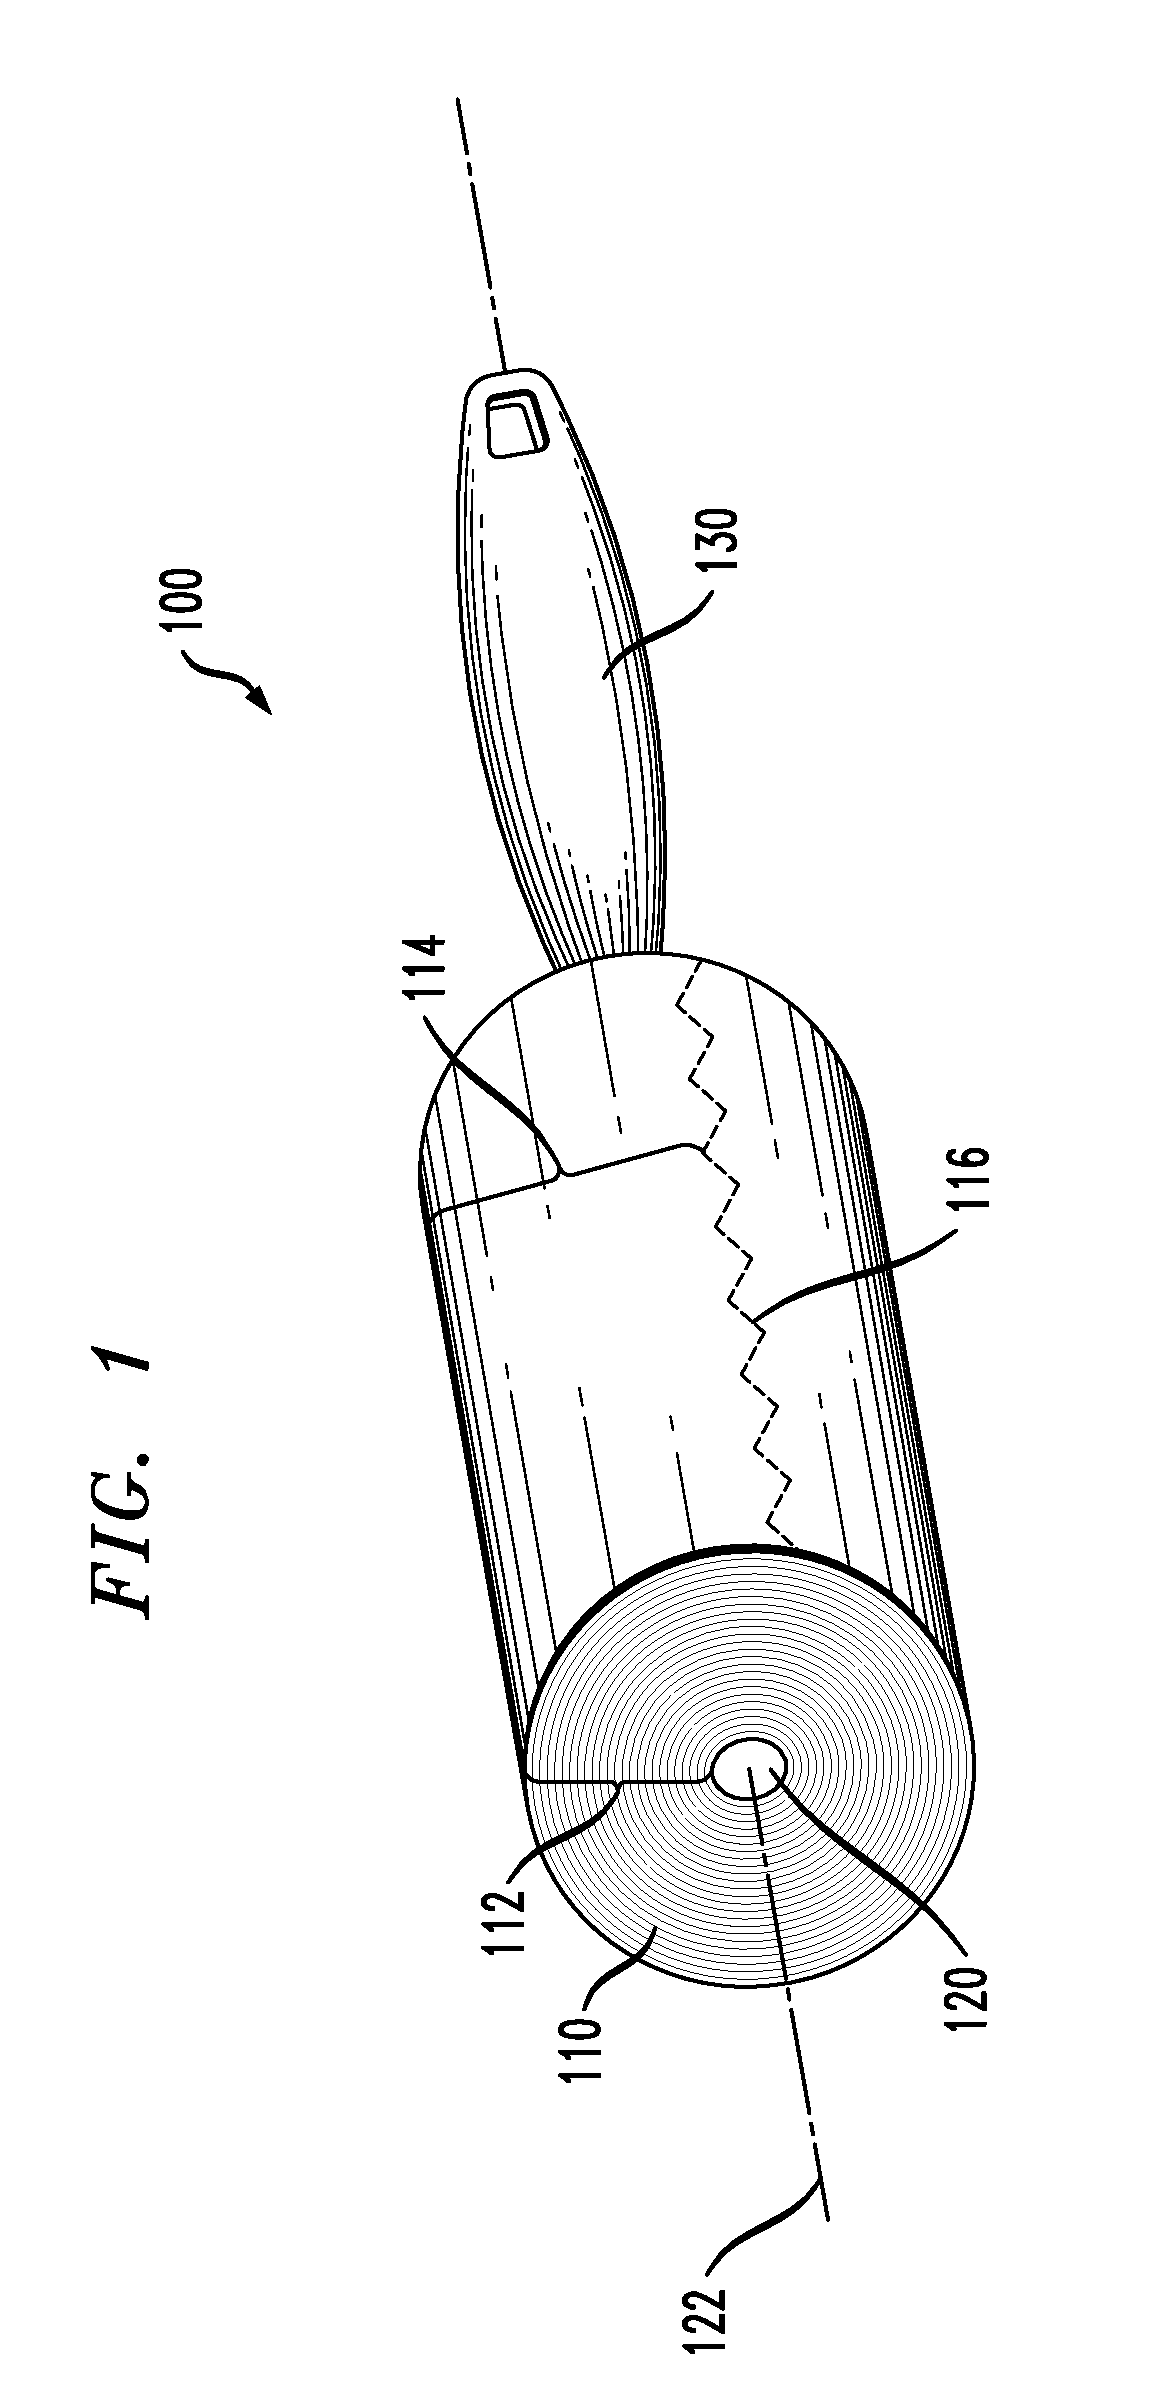 Animal calming device and methods thereof